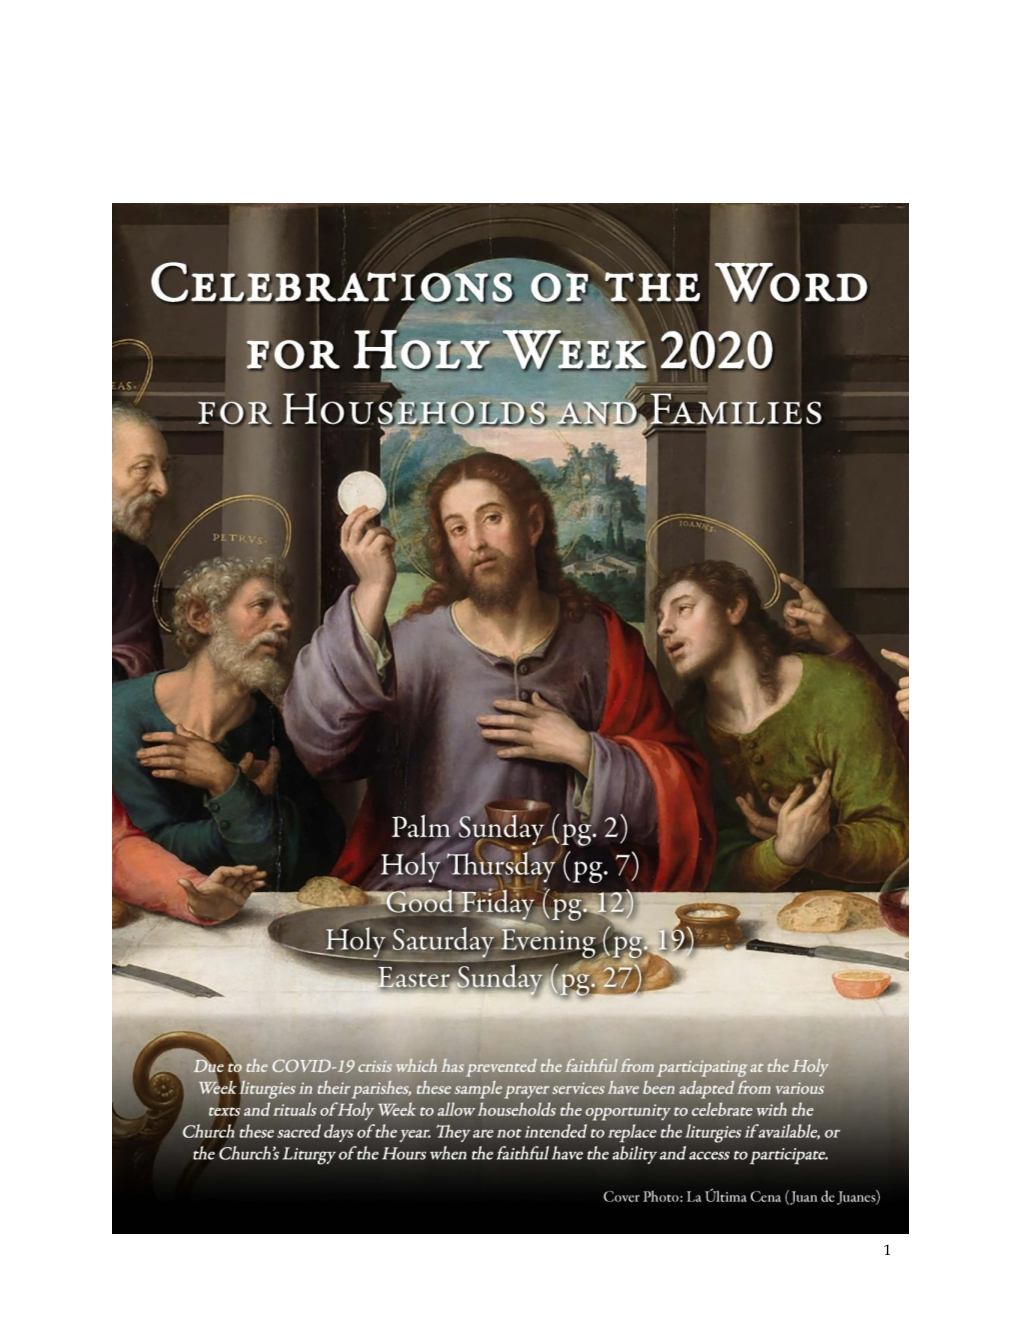 Prayer Services for Home During Holy Week 2020